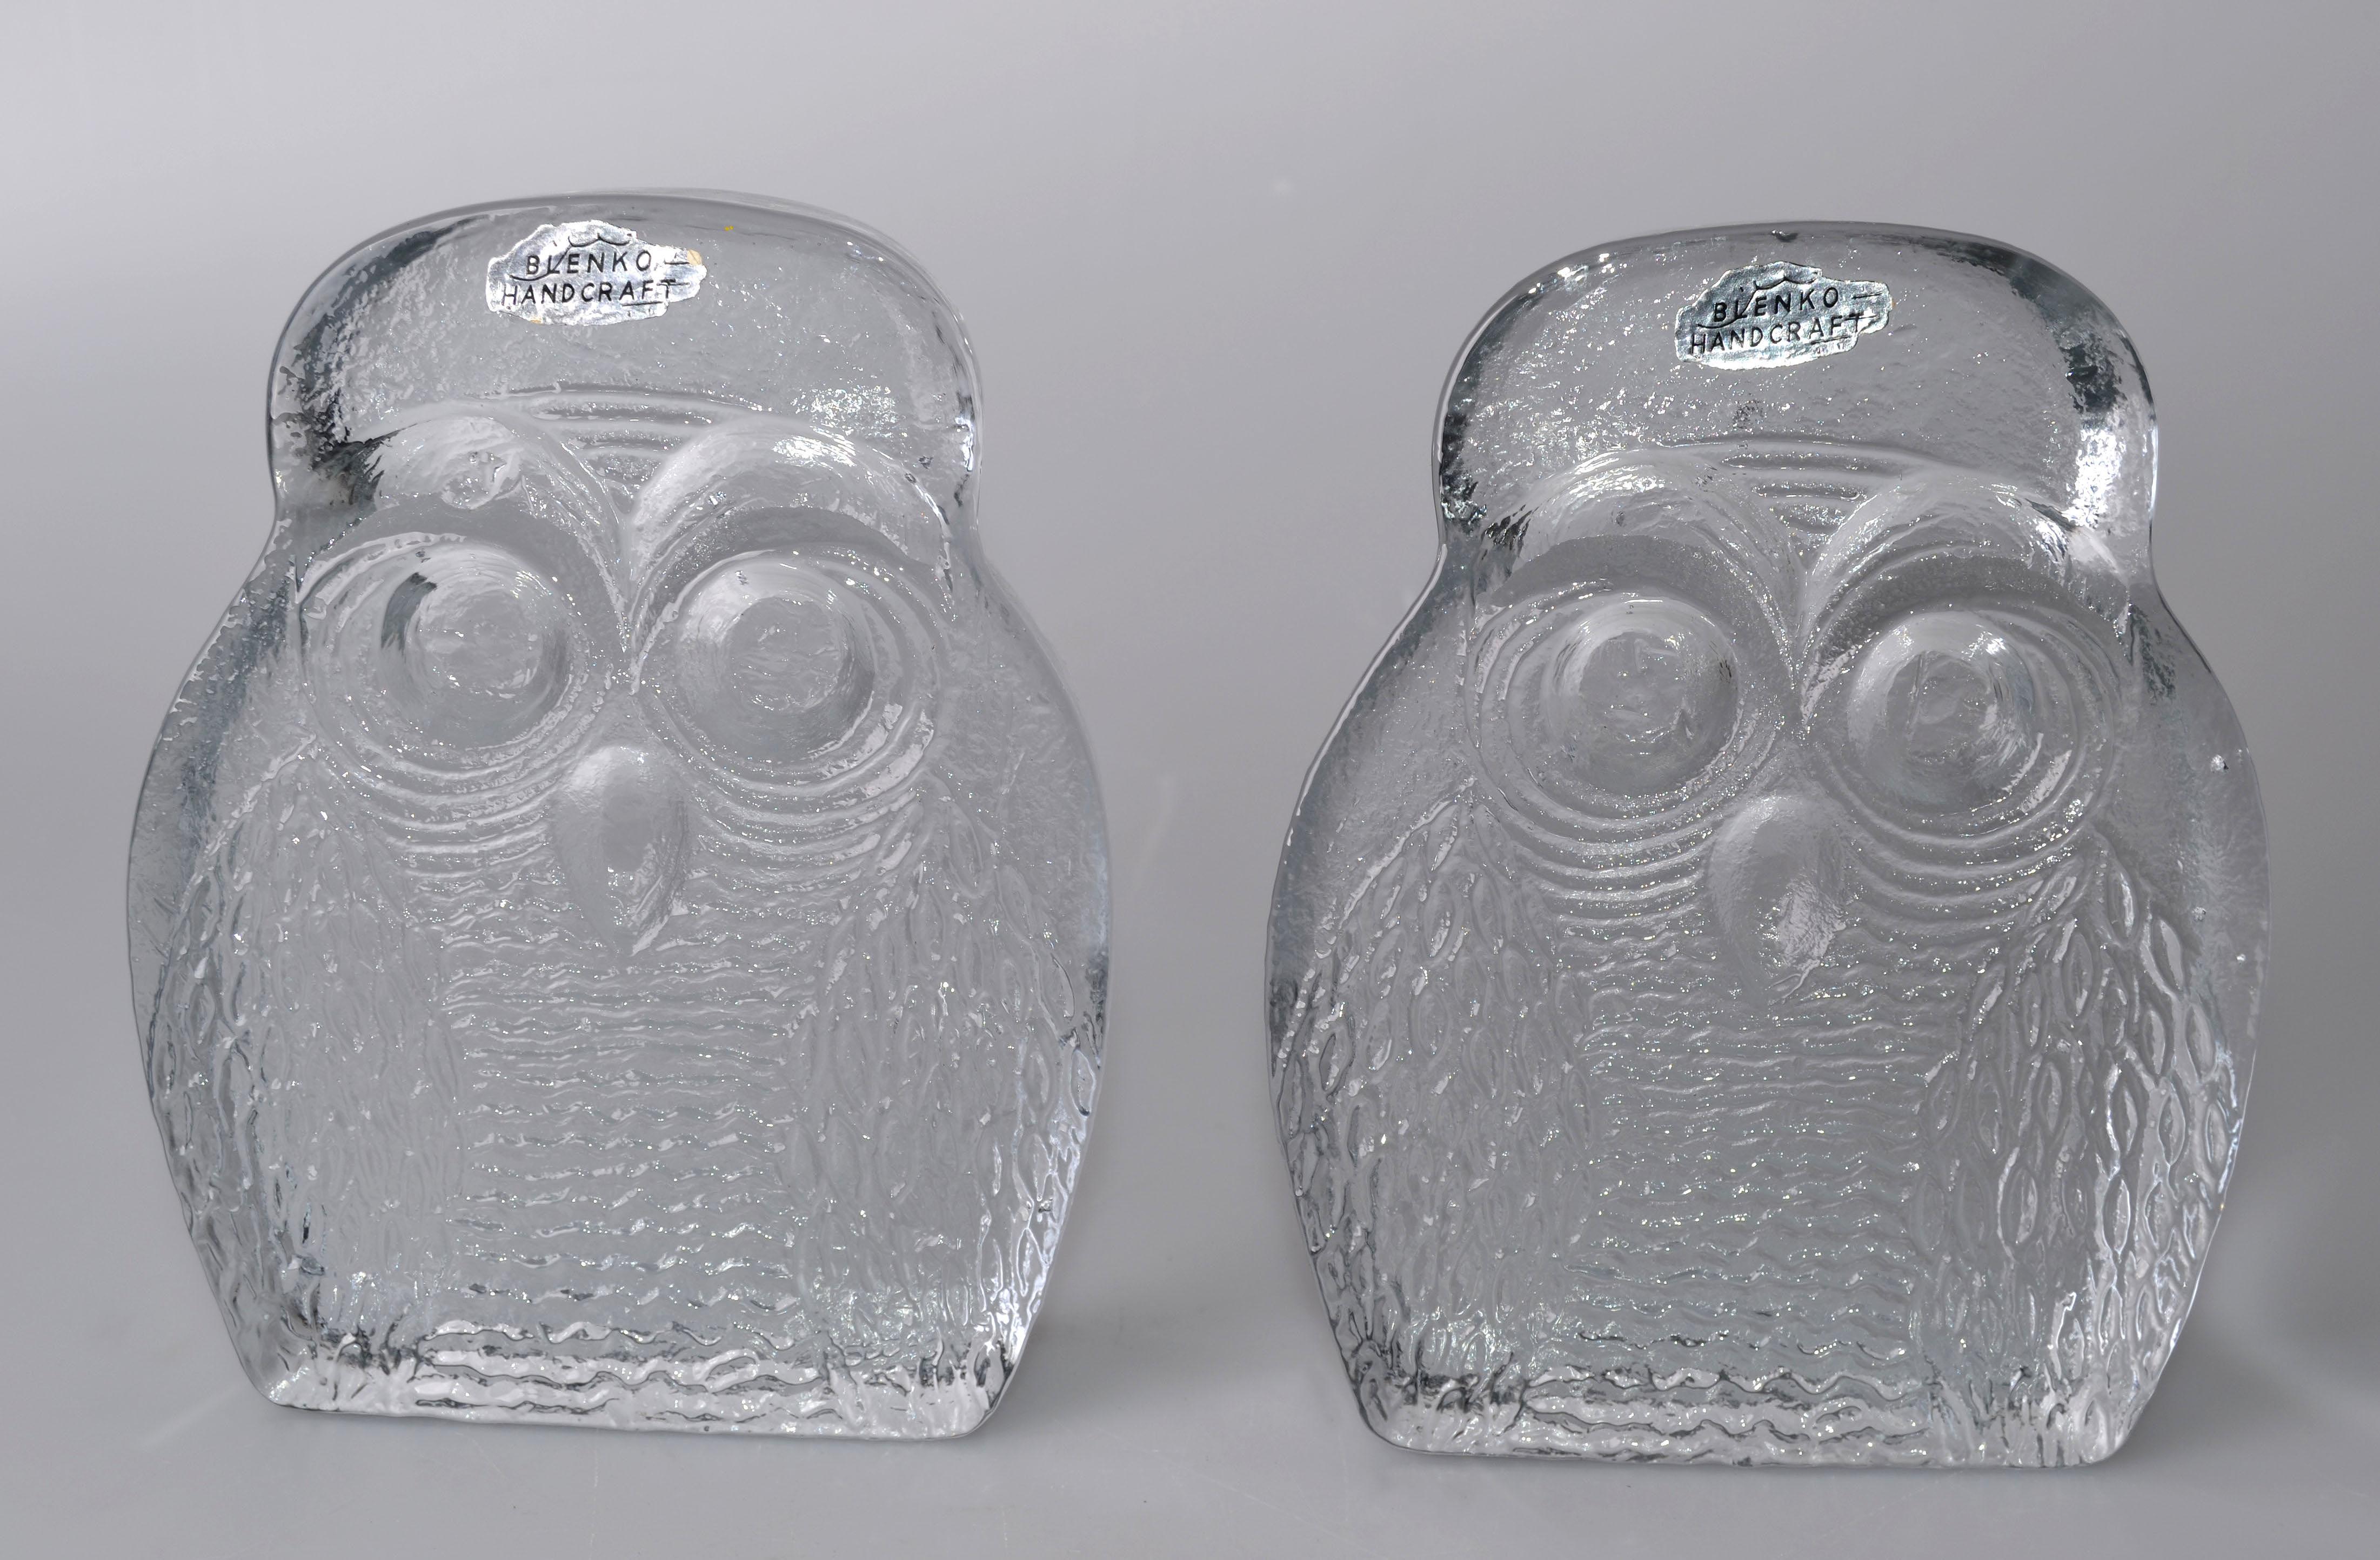 Mid-Century Modern handcrafted Blenko thick glass owl bookends.
Original label on back of each.